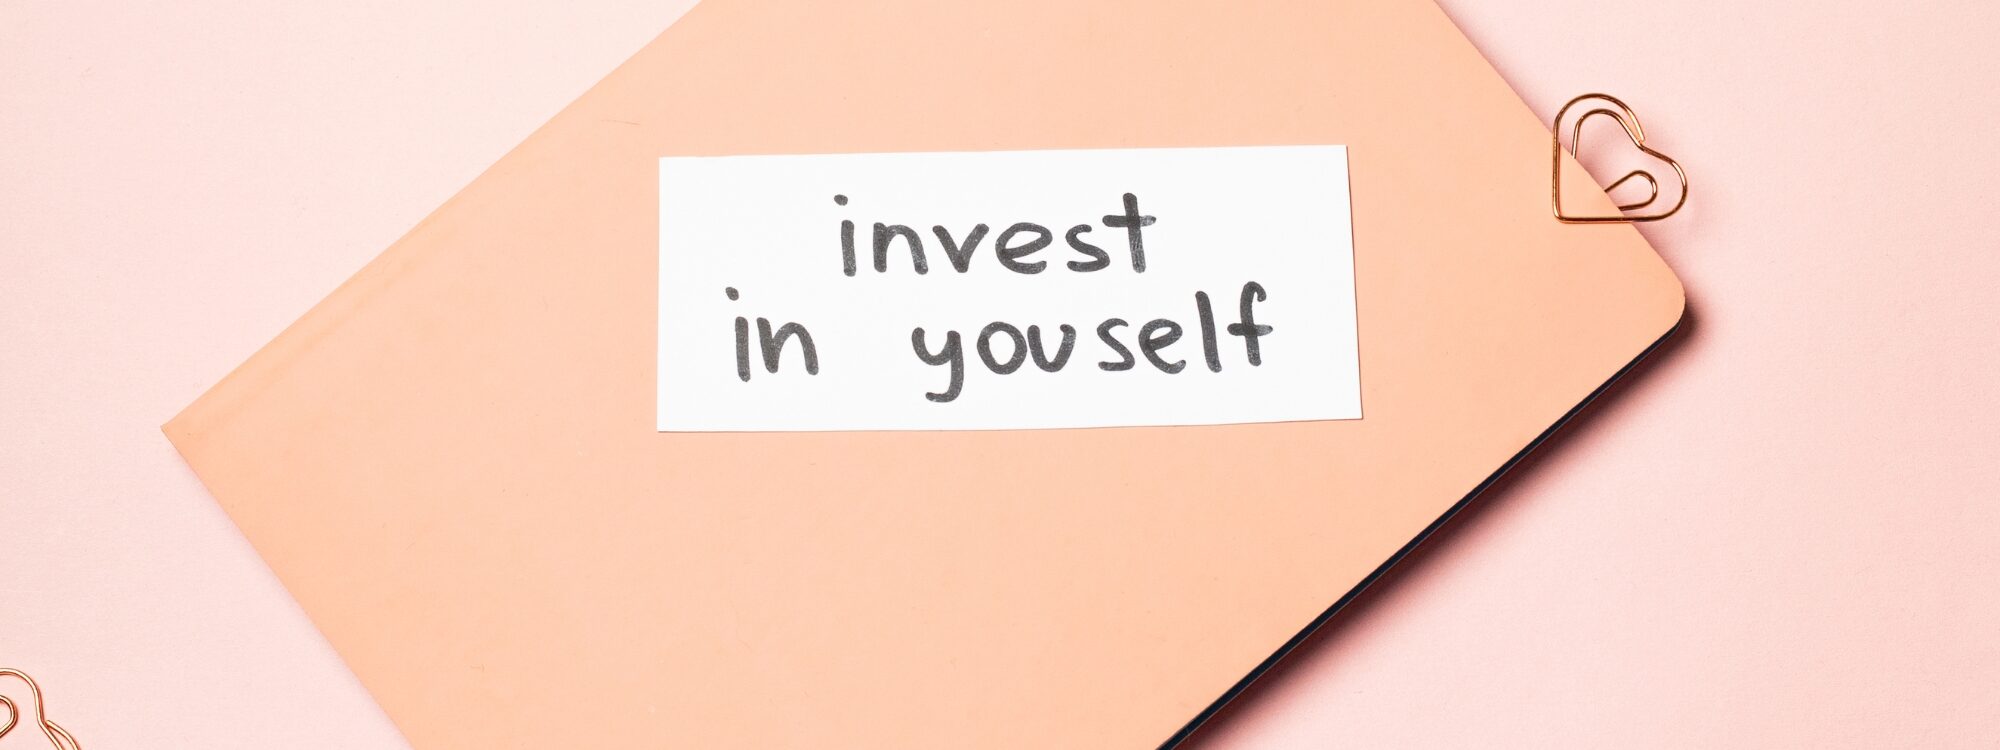 7 Ways In Investing in Yourself and How To Increase Your Earning Potential.